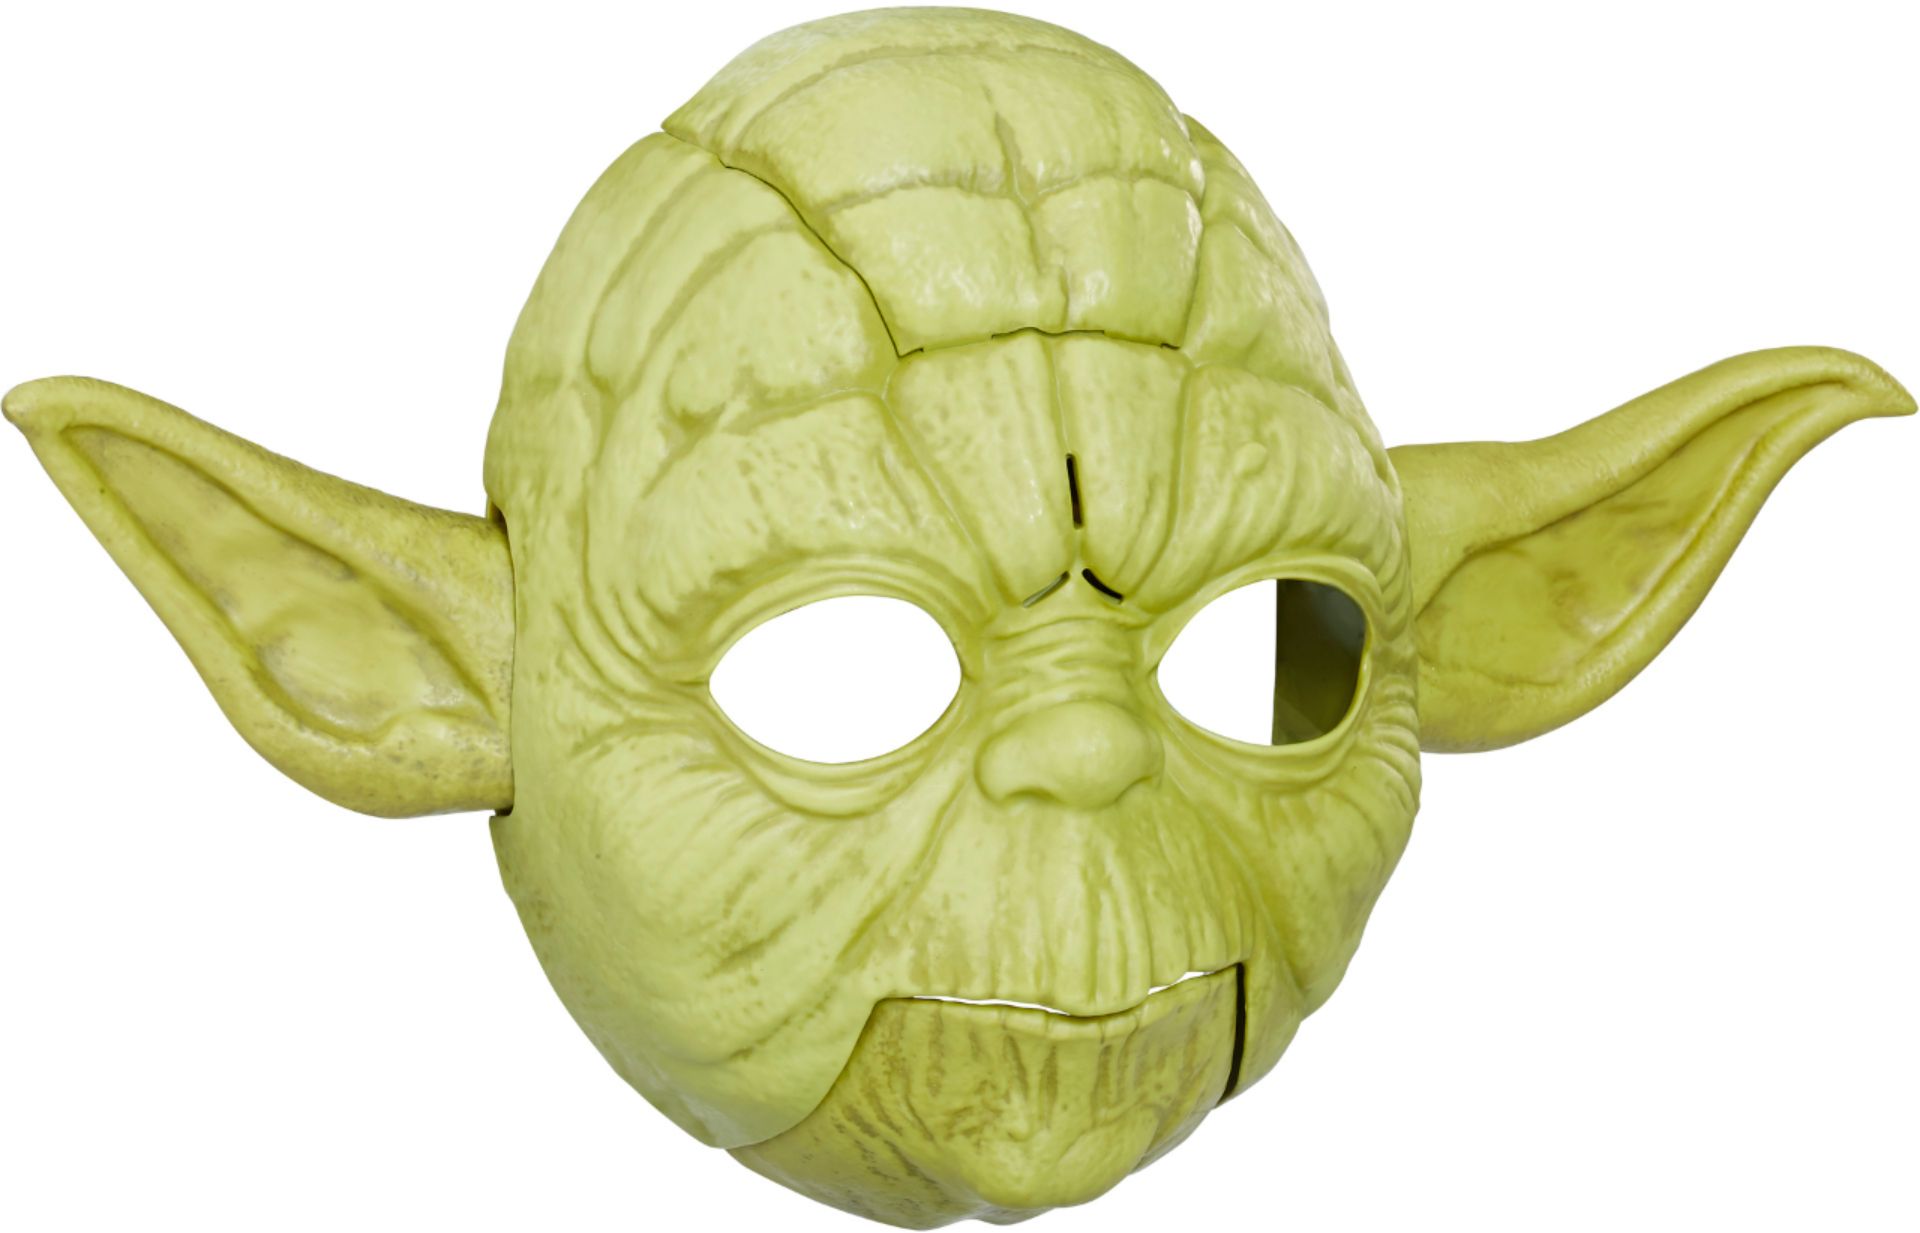 Star Wars - The Empire Strikes Back Yoda Electronic Mask $16 + Free Store Pickup at Best Buy